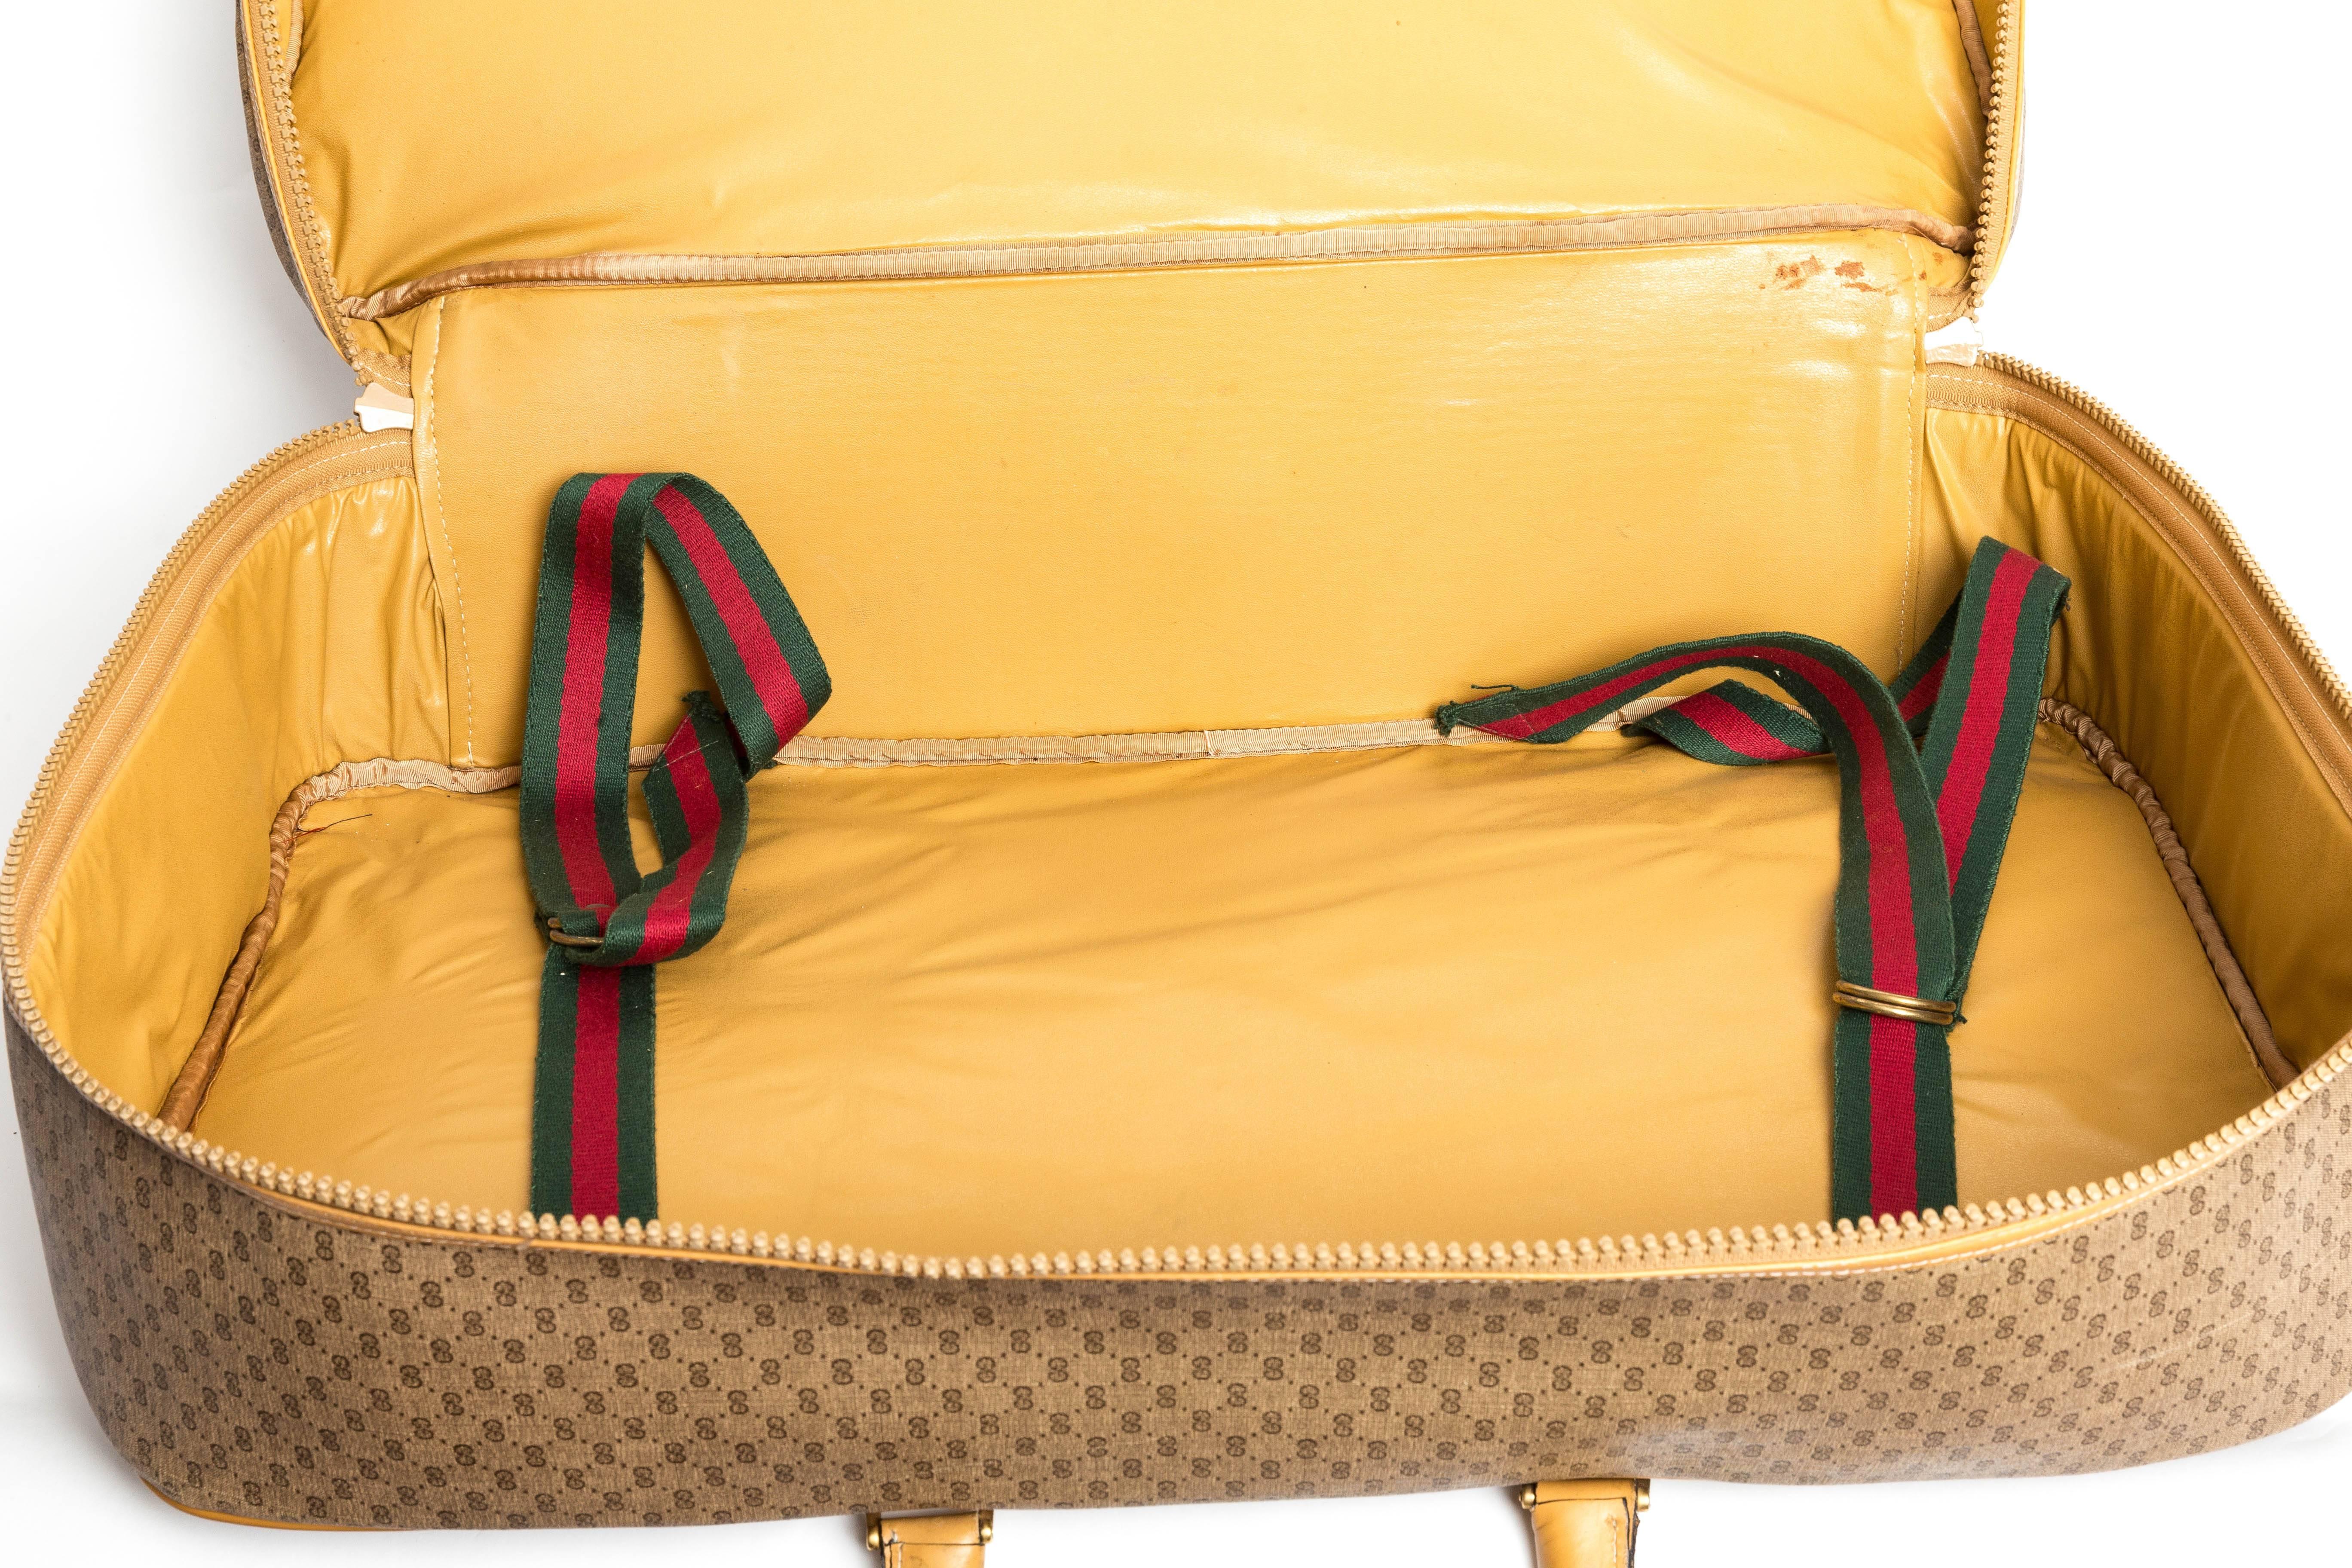 Gucci Soft Tan Monogram Suitcase With Heritage Stripe For Sale 2